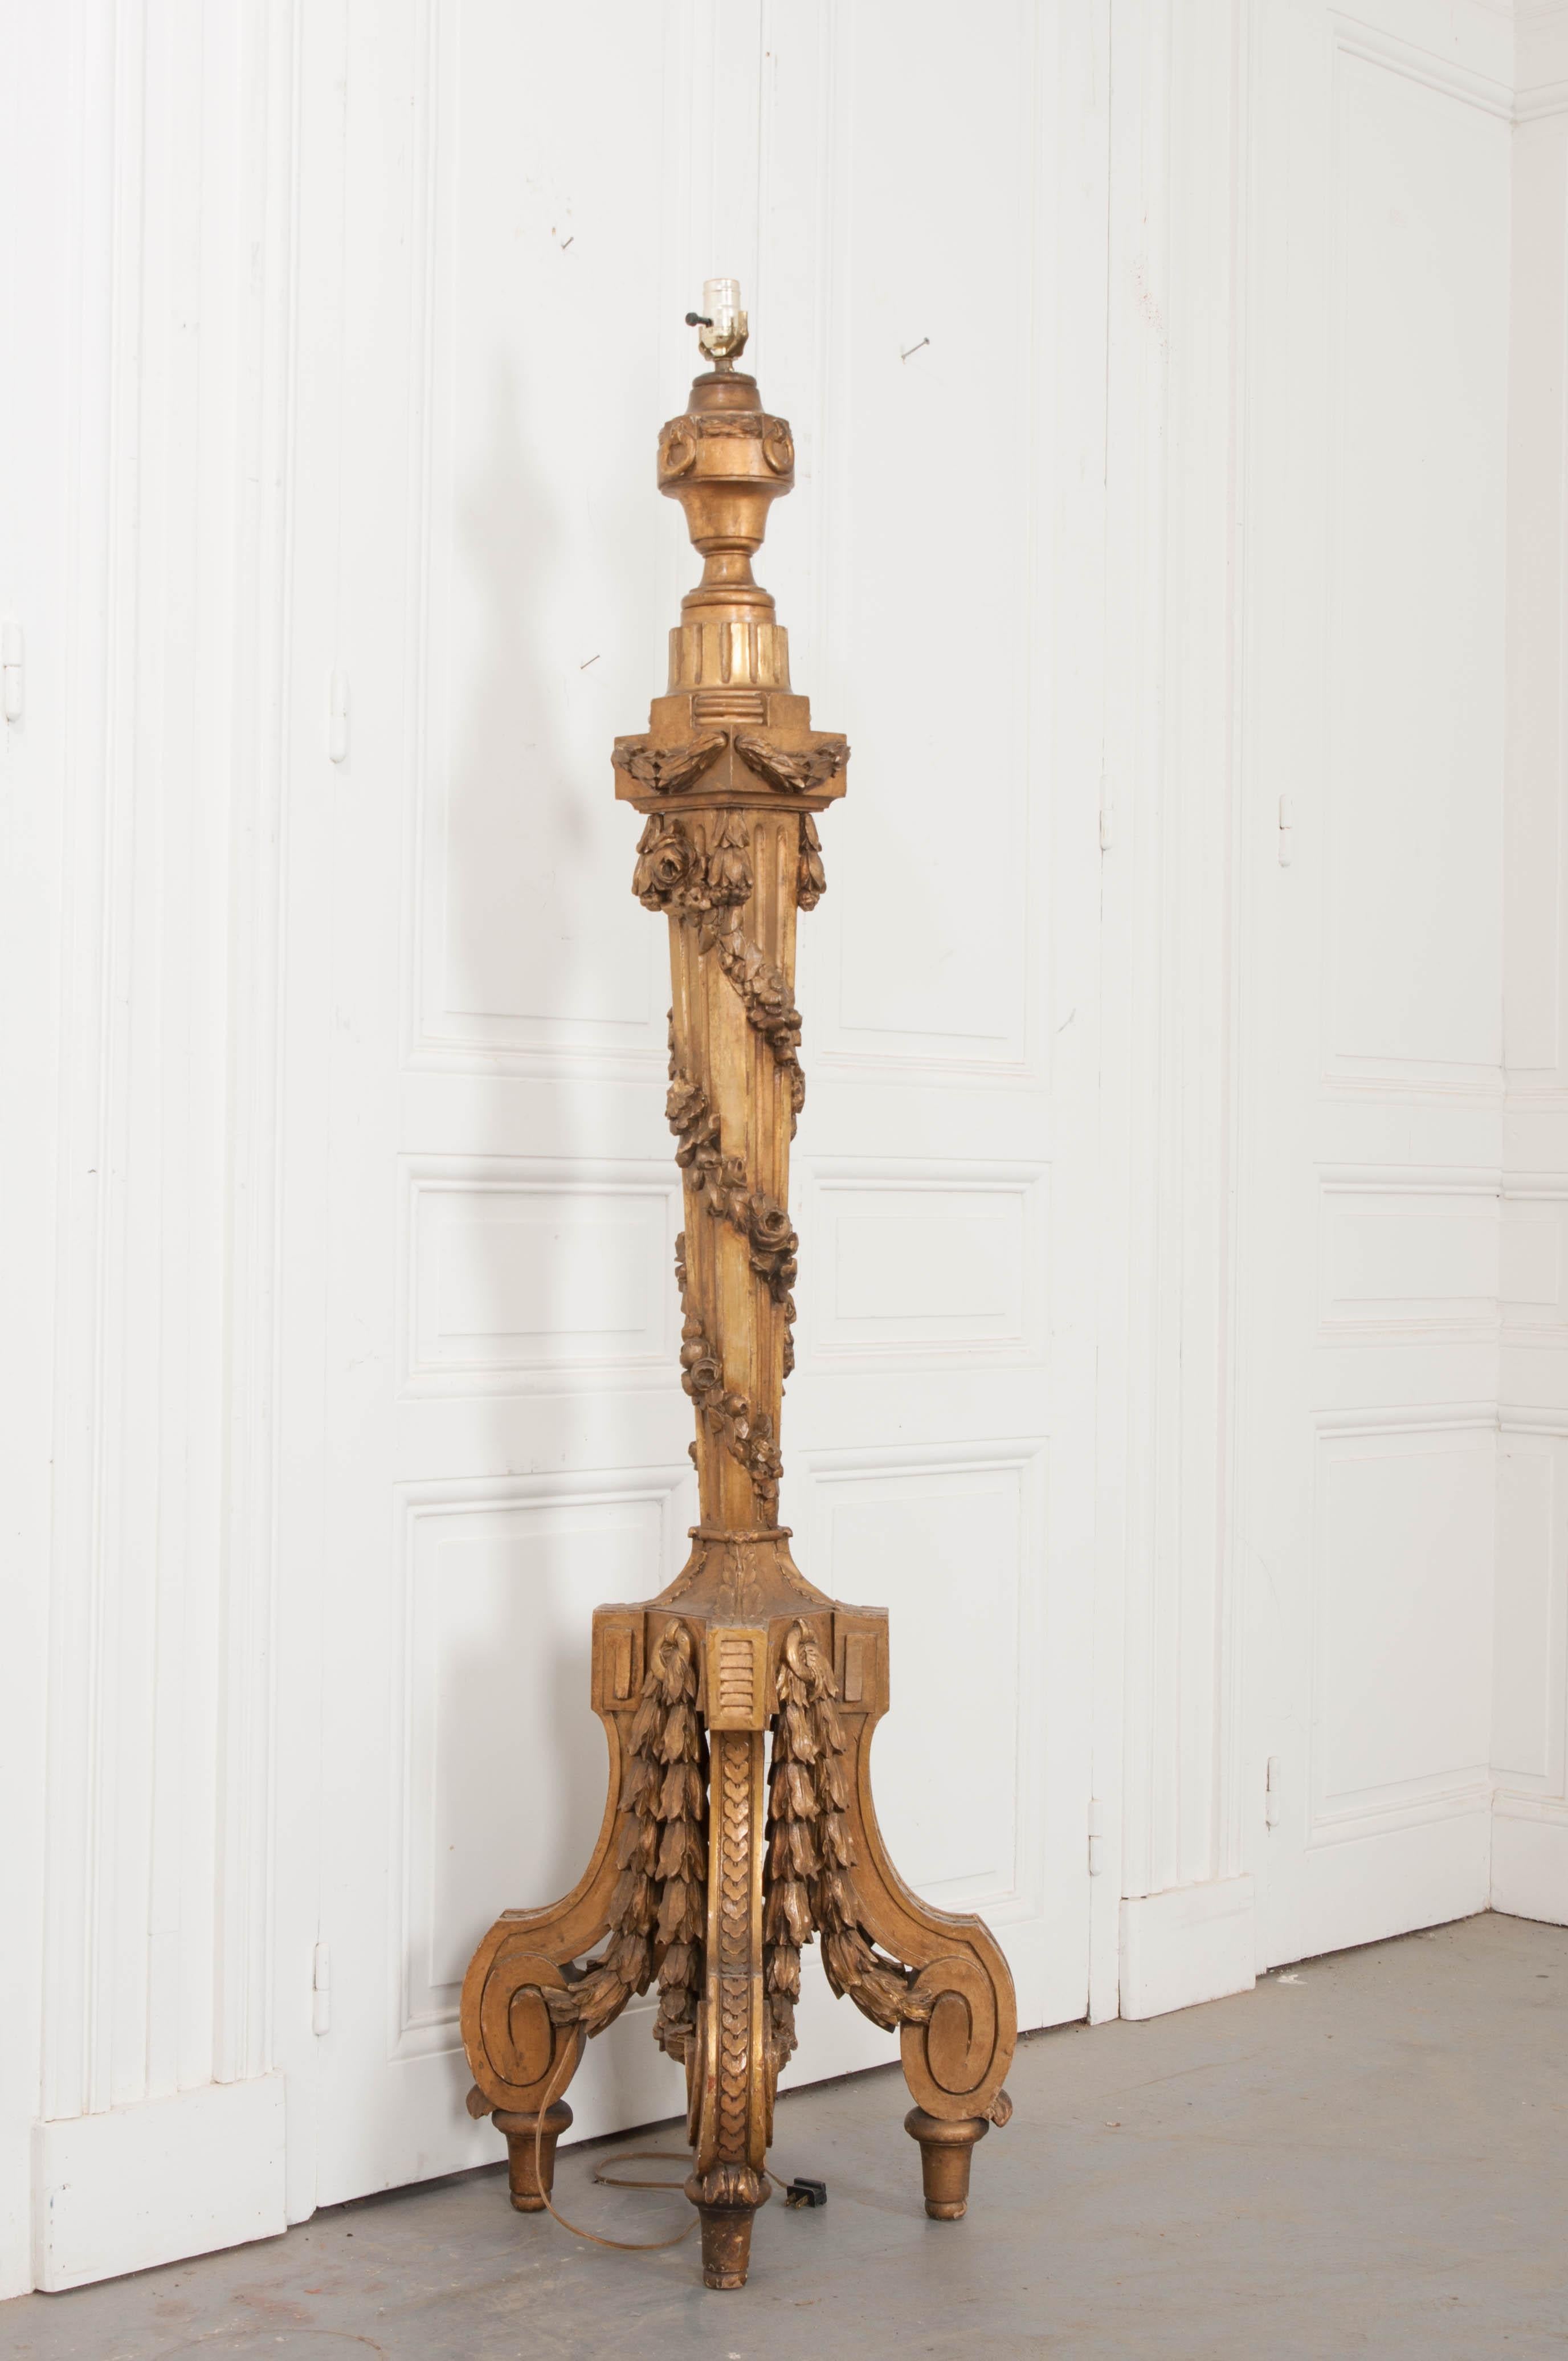 This beautifully carved candlestick is from the middle 1800s, once used in a church, it has been converted to a floor lamp. The top has carved gold gilt garlands the swag horizontally around the column’s capital. More carved garlands twist down the